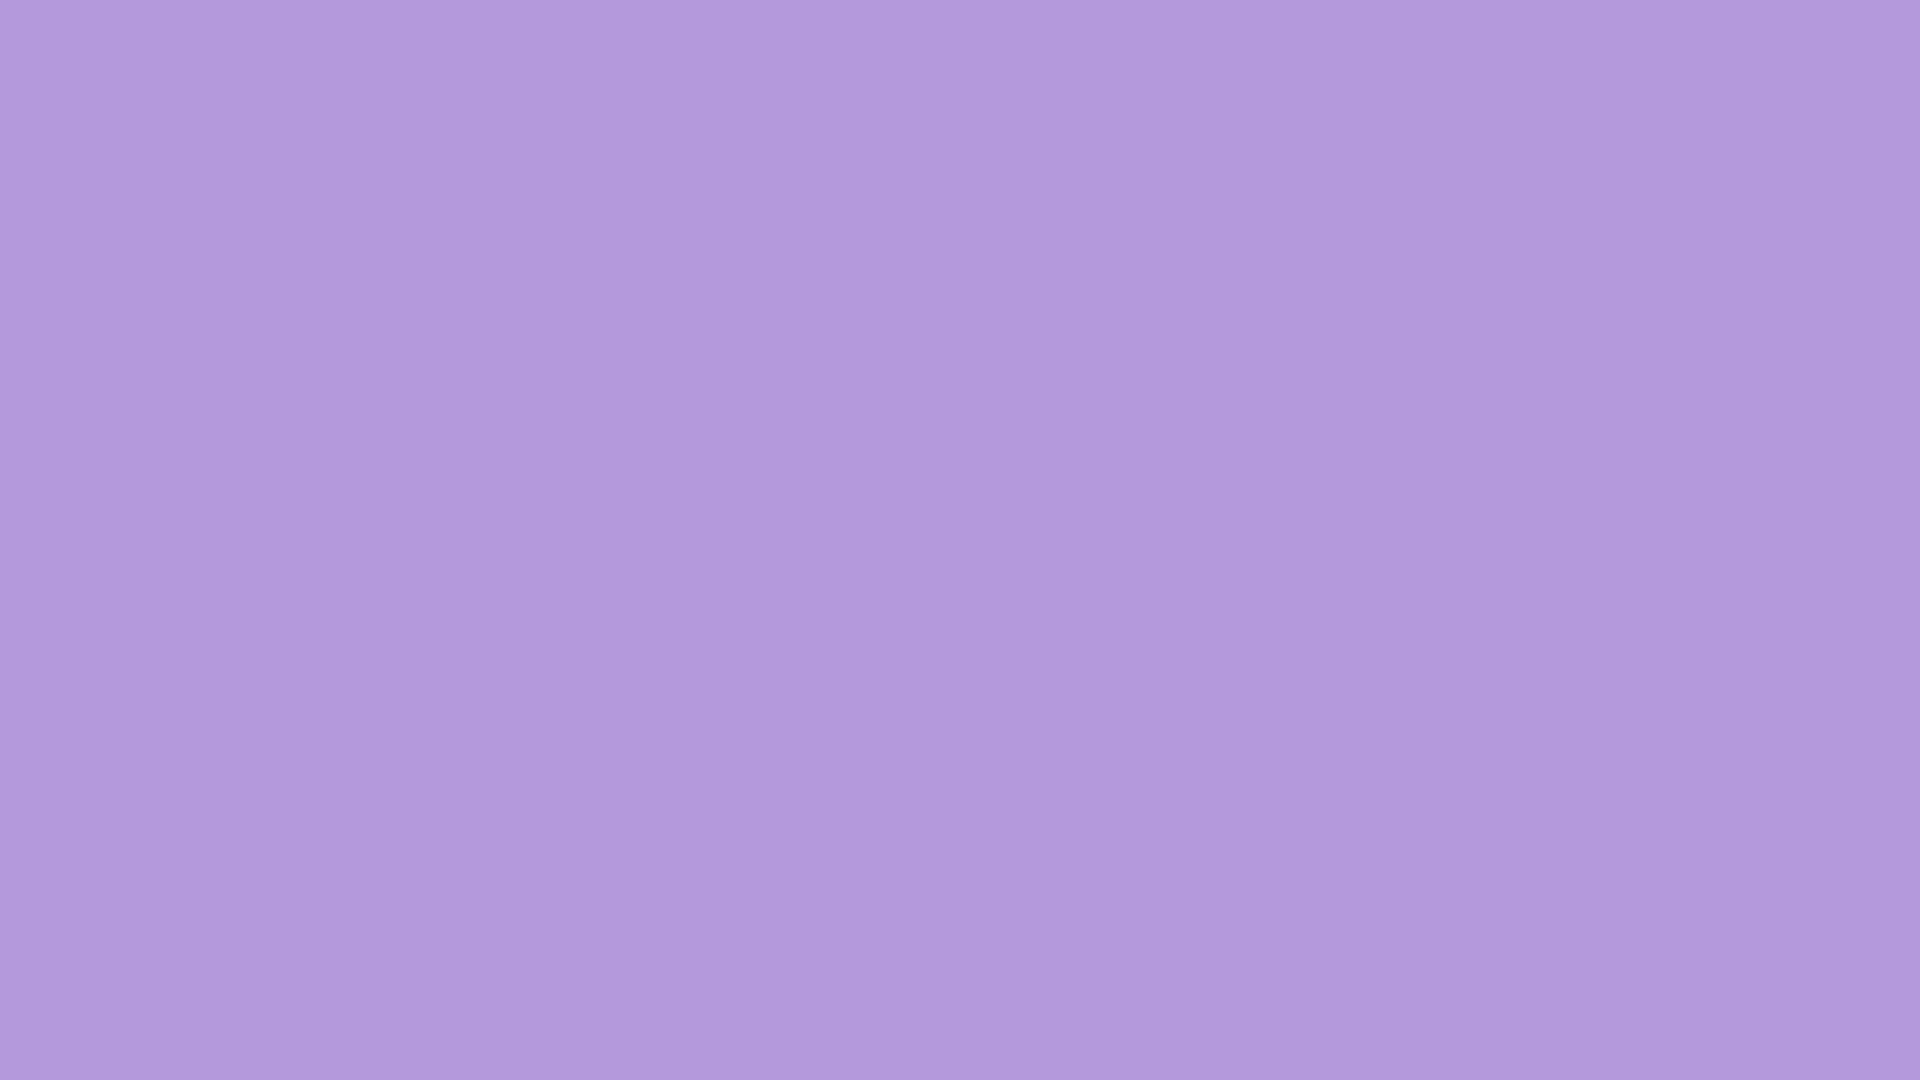 Bright, Colorful, Blended Solid Light Purple Wallpaper